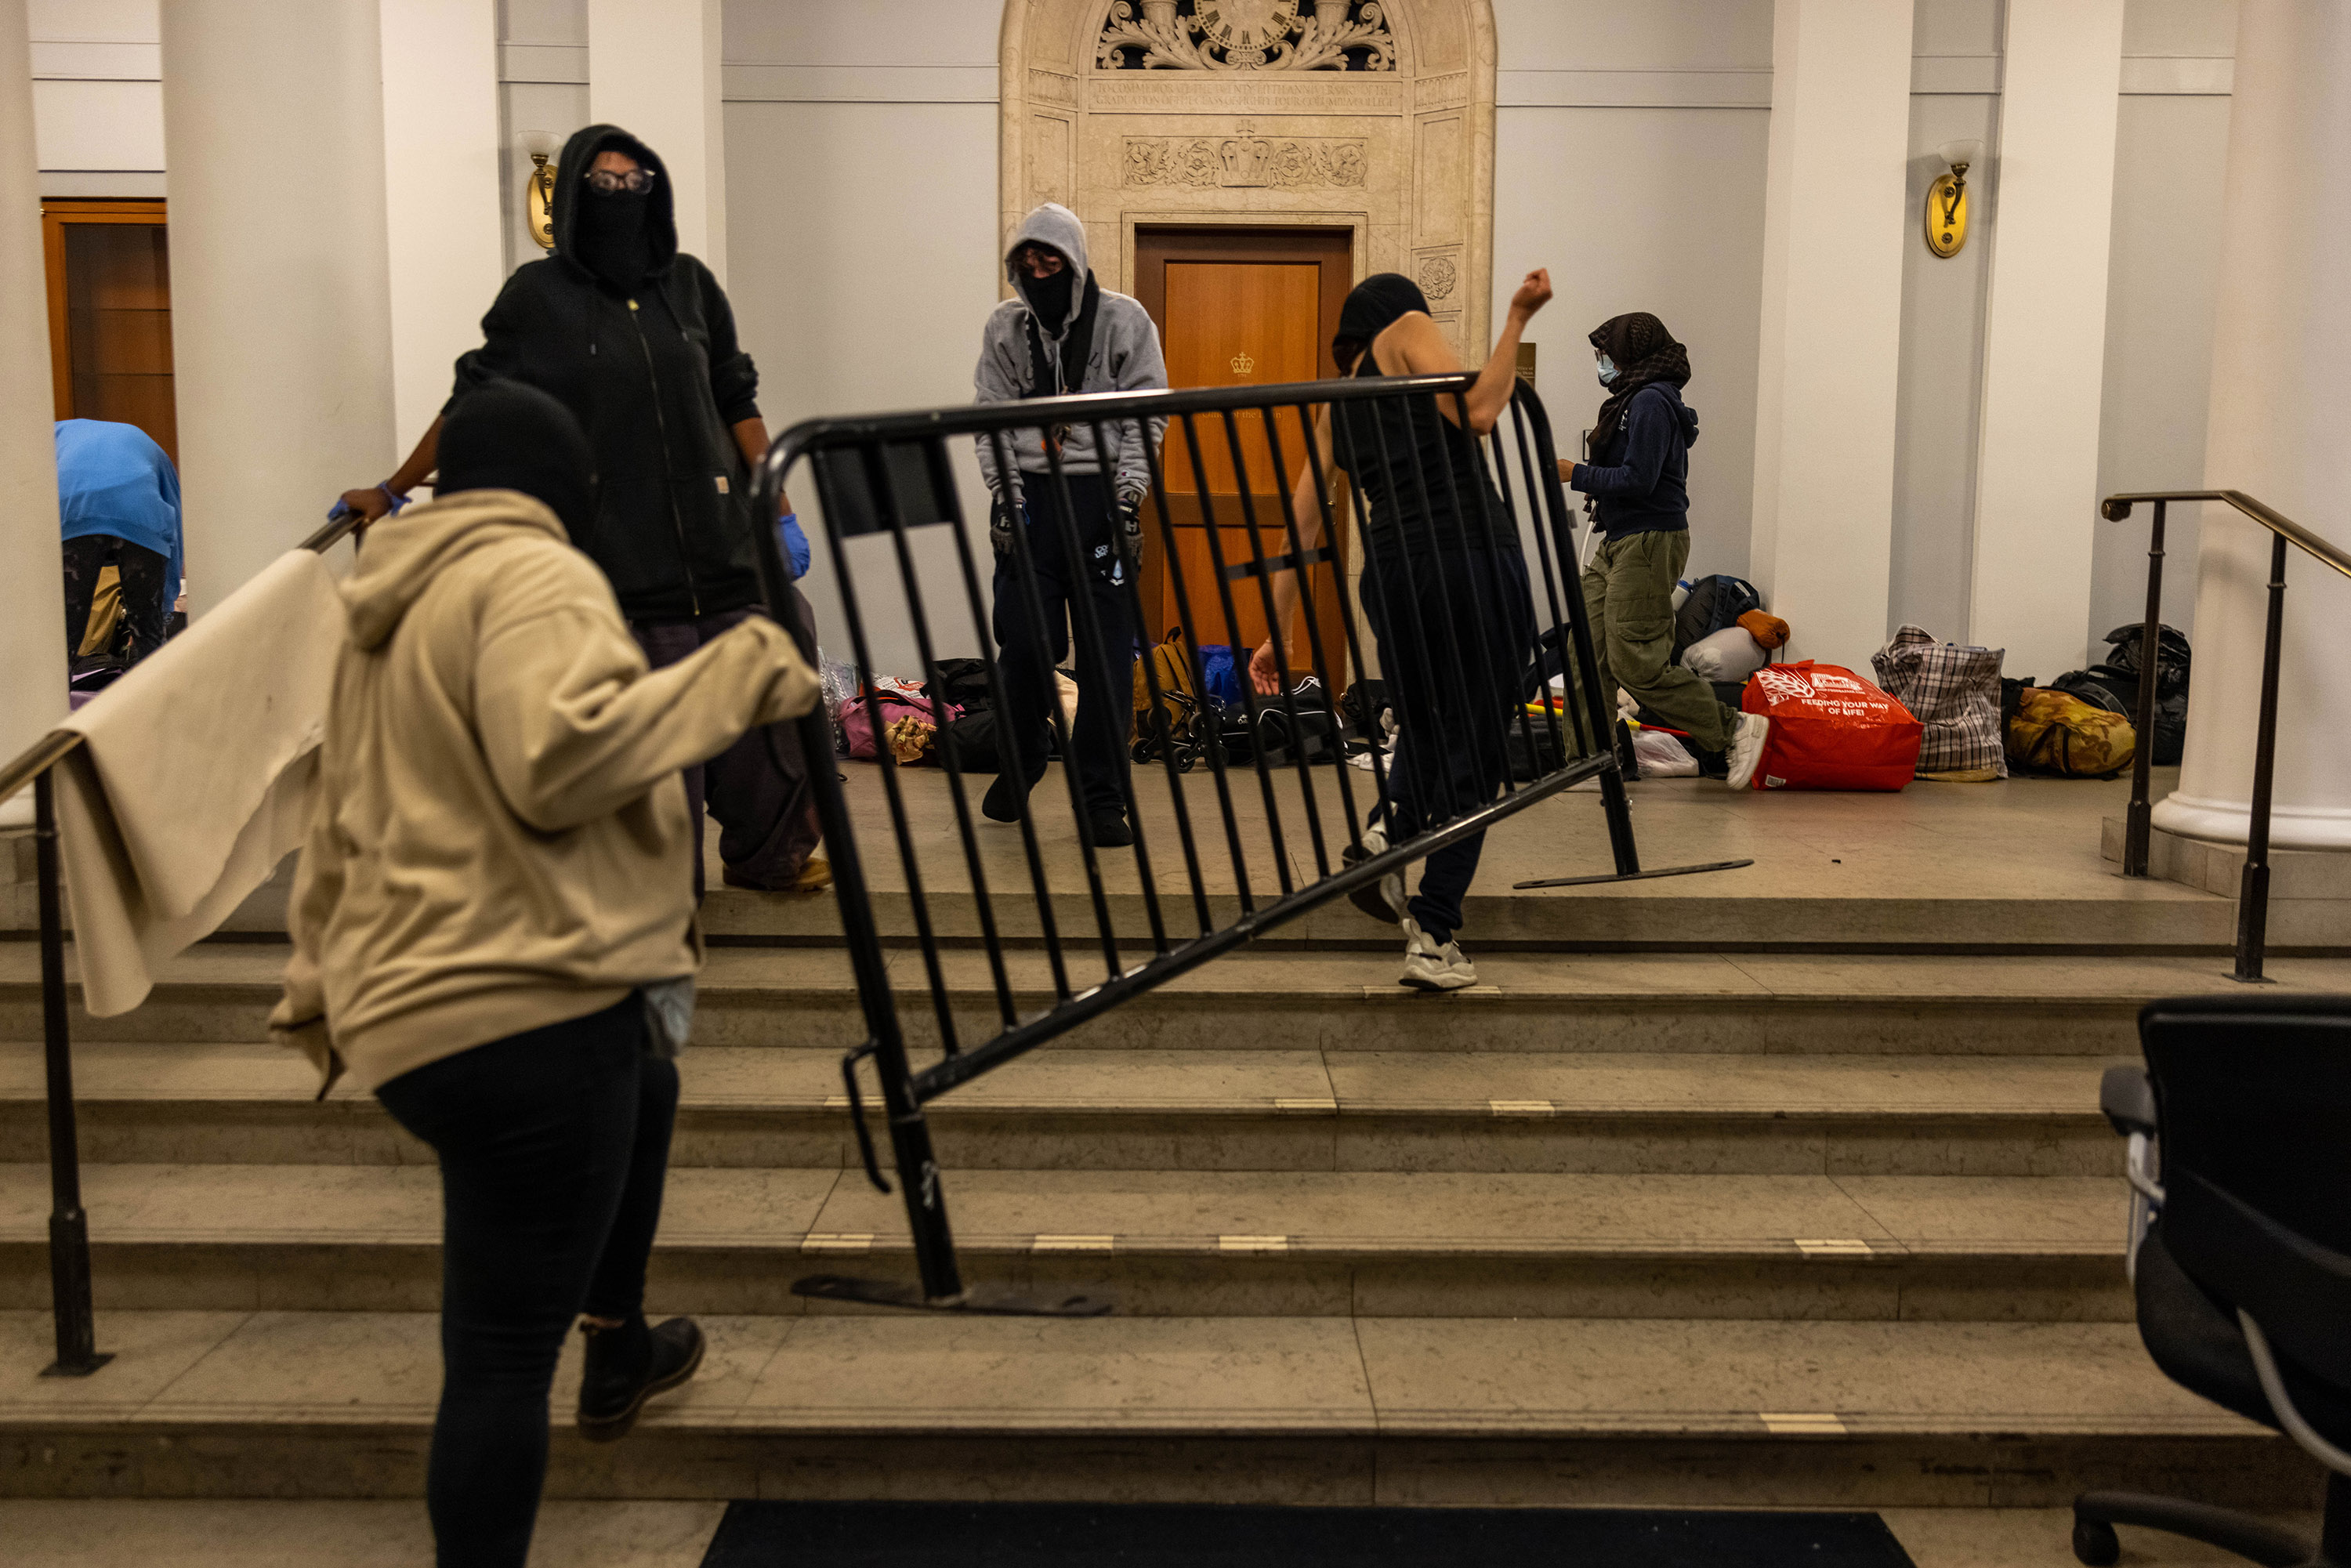 Demonstrators supporting Palestinians in Gaza barricade themselves inside Columbia University's Hamilton Hall in New York City, on April 30. 